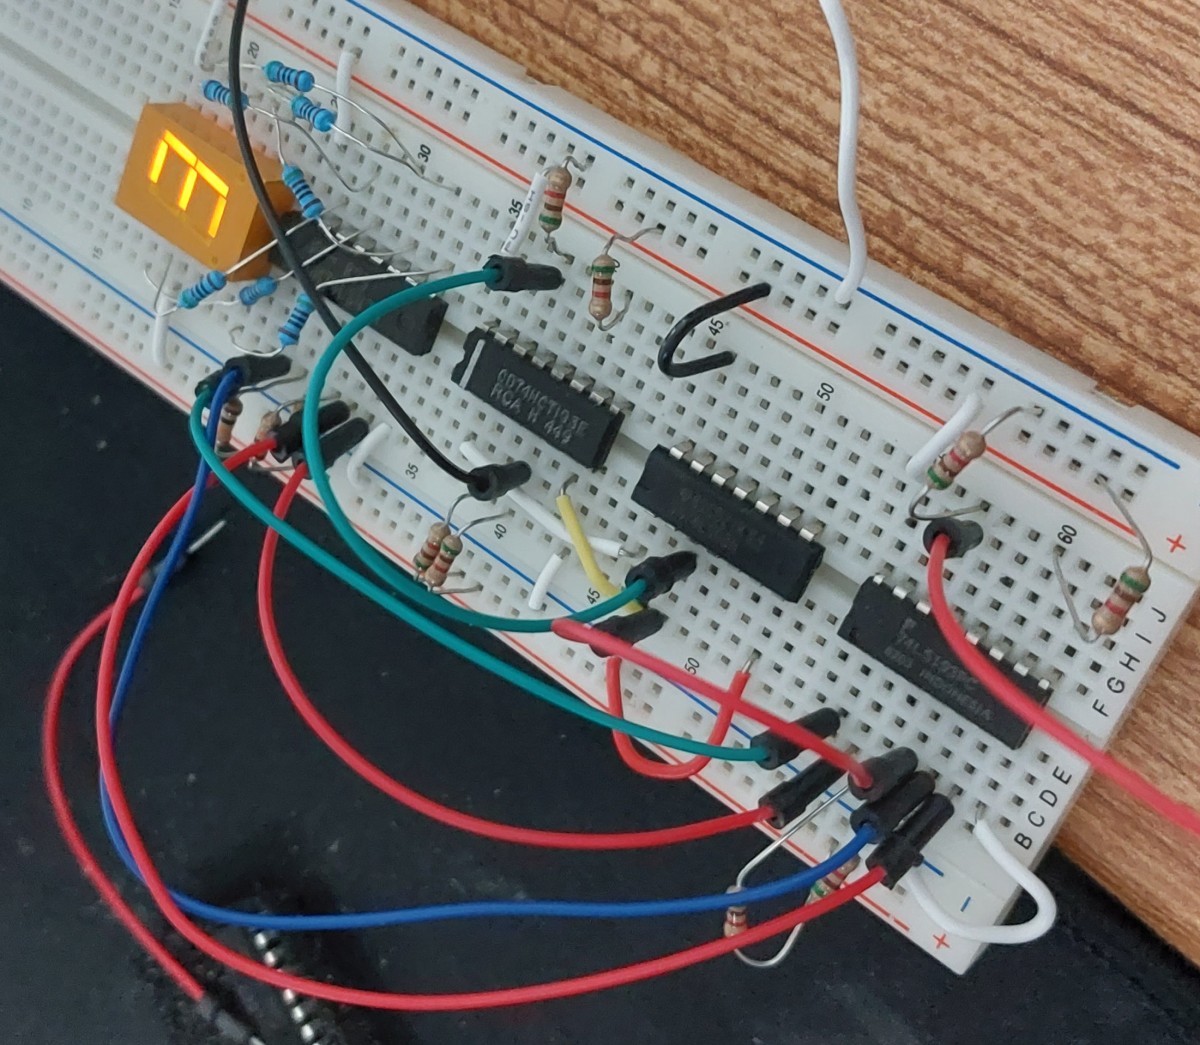 Cascading counters test. Note the additional counter at the bottom of the breadboard connected to the other (second chip from the top) and the AND gate between them